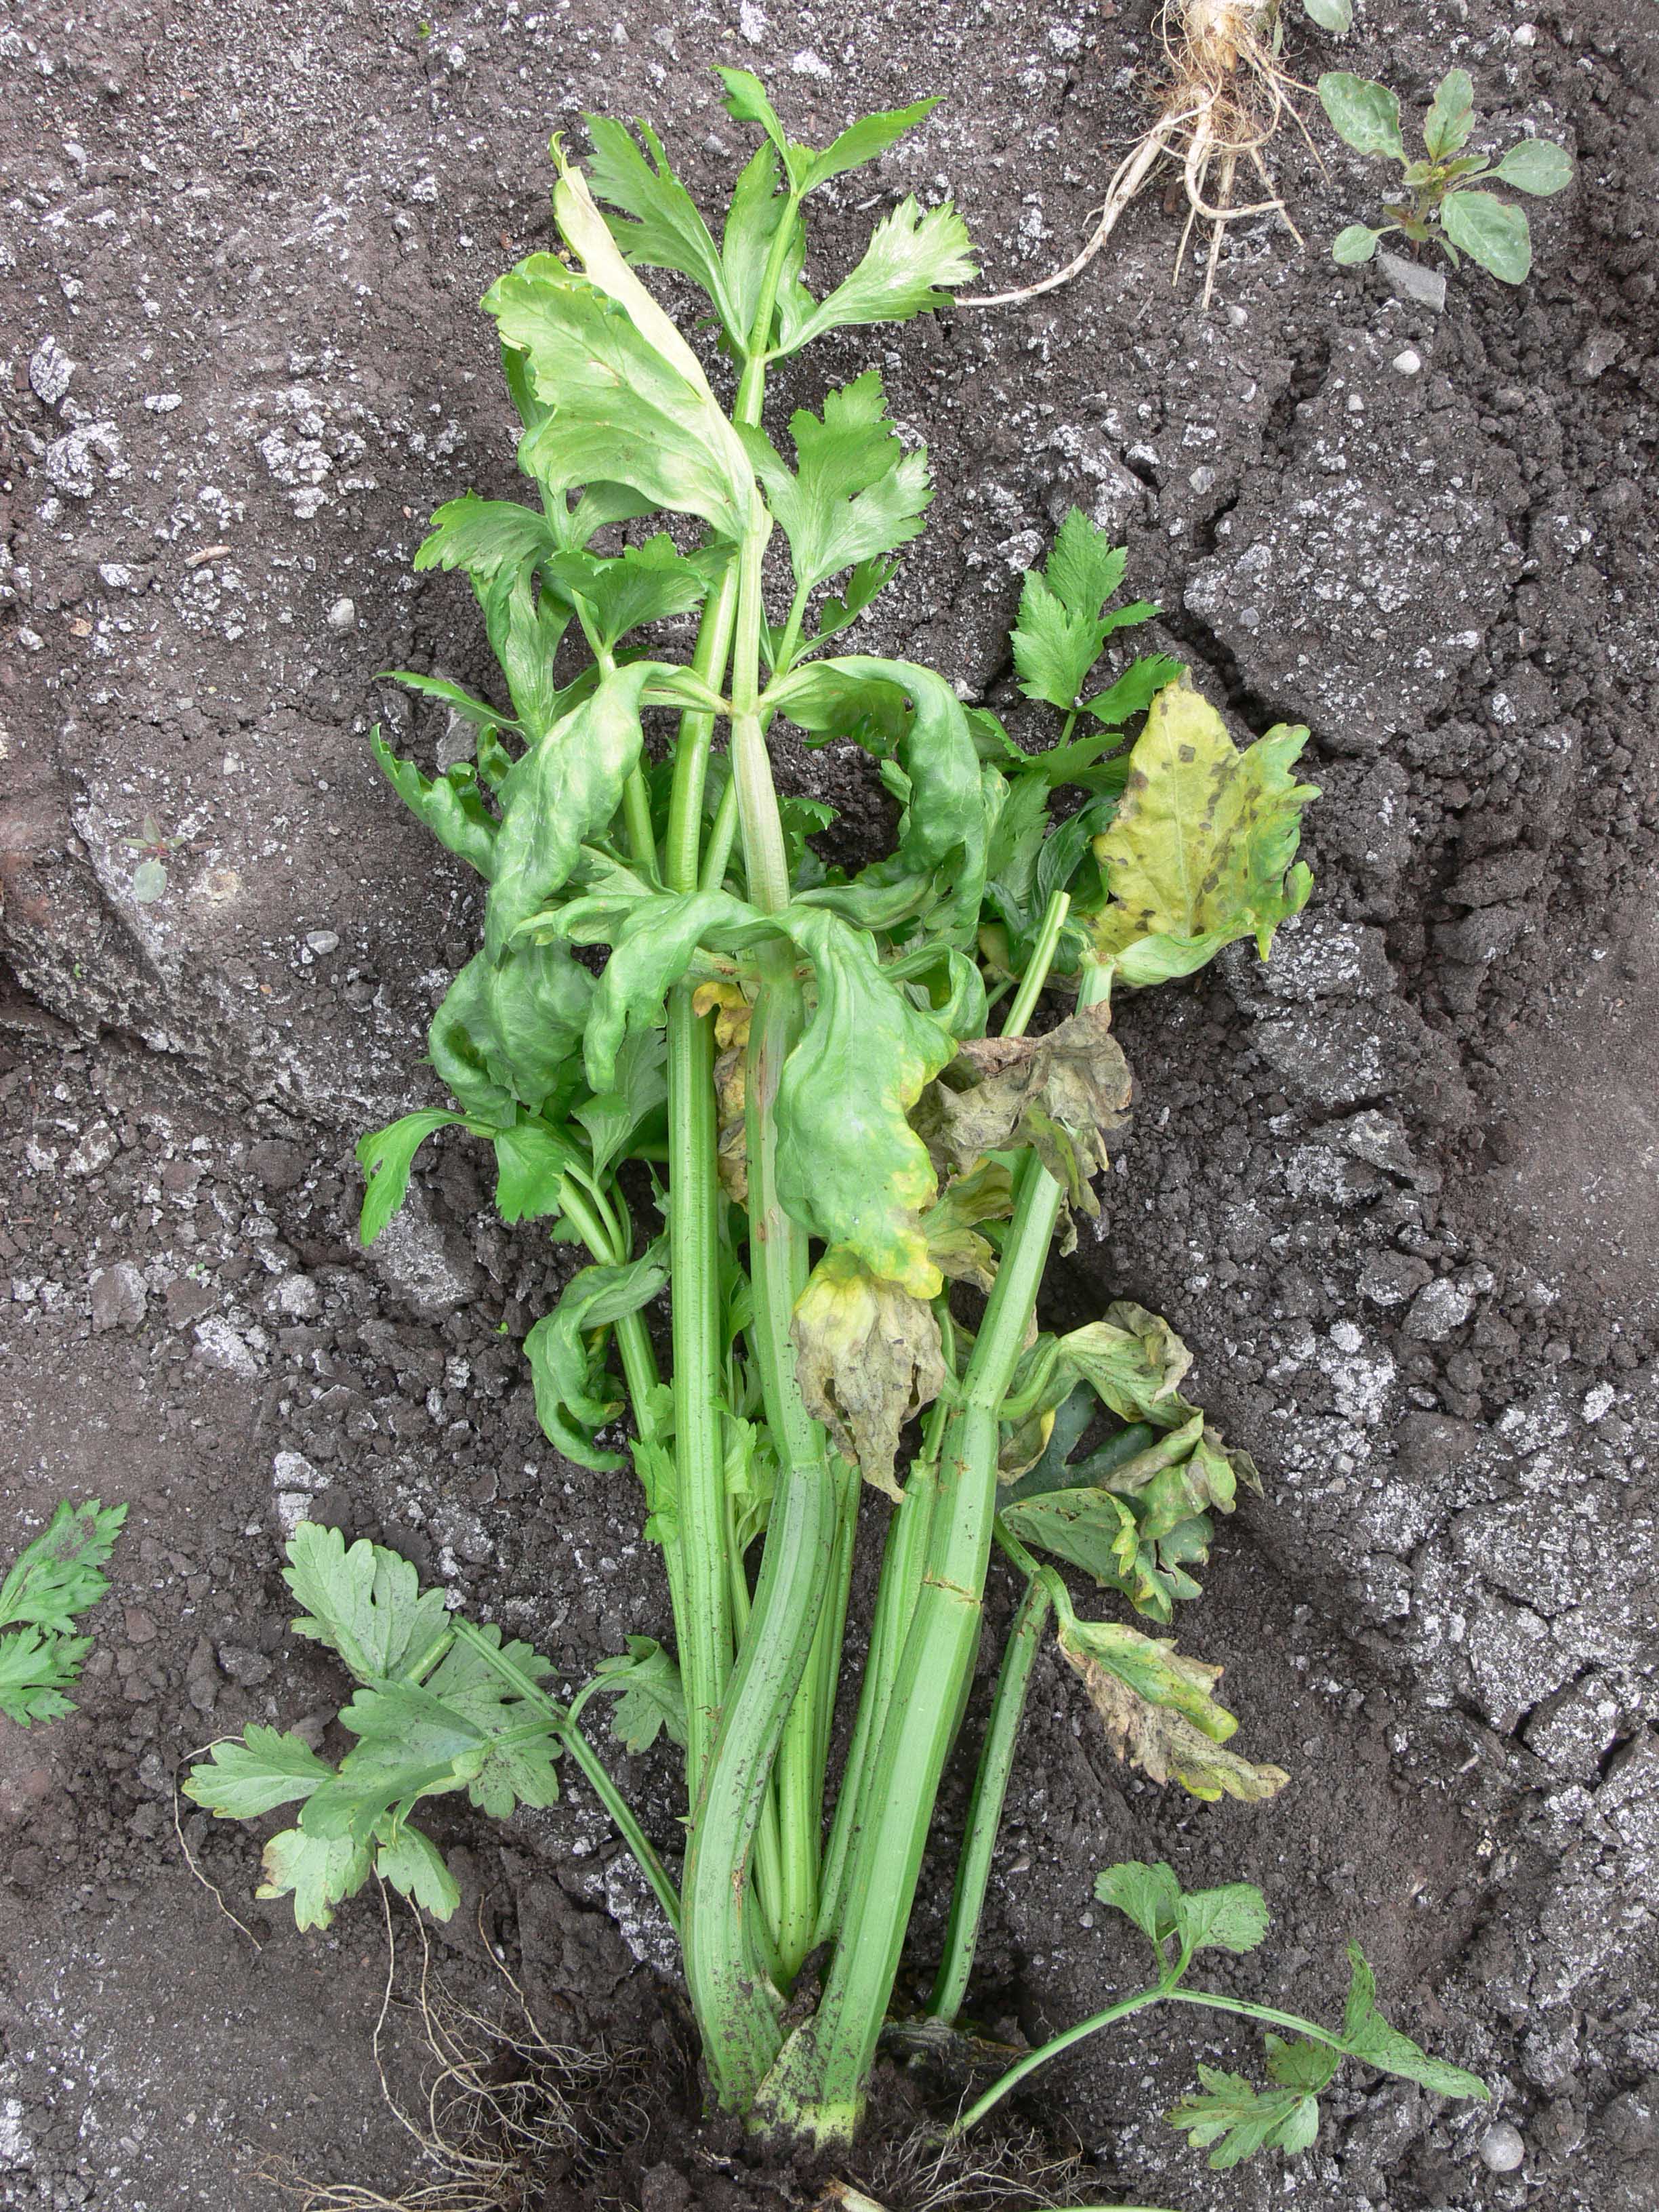 Celery bunch with browned stalks and curled and yellow leaves